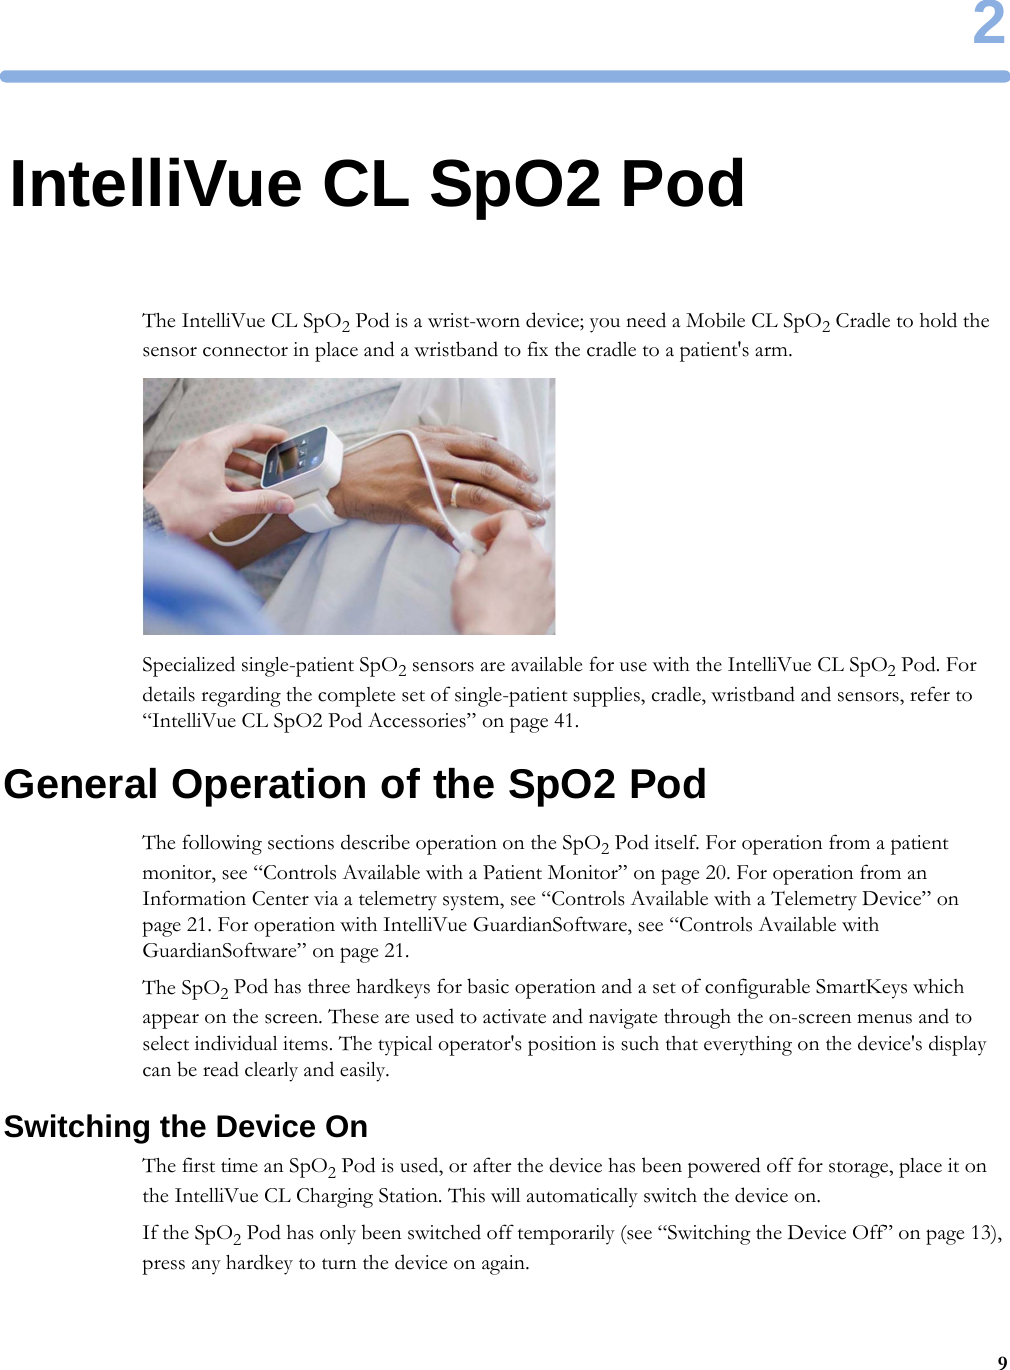 292IntelliVue CL SpO2 PodThe IntelliVue CL SpO2 Pod is a wrist-worn device; you need a Mobile CL SpO2 Cradle to hold the sensor connector in place and a wristband to fix the cradle to a patient&apos;s arm.Specialized single-patient SpO2 sensors are available for use with the IntelliVue CL SpO2 Pod. For details regarding the complete set of single-patient supplies, cradle, wristband and sensors, refer to “IntelliVue CL SpO2 Pod Accessories” on page 41.General Operation of the SpO2 PodThe following sections describe operation on the SpO2 Pod itself. For operation from a patient monitor, see “Controls Available with a Patient Monitor” on page 20. For operation from an Information Center via a telemetry system, see “Controls Available with a Telemetry Device” on page 21. For operation with IntelliVue GuardianSoftware, see “Controls Available with GuardianSoftware” on page 21.The SpO2 Pod has three hardkeys for basic operation and a set of configurable SmartKeys which appear on the screen. These are used to activate and navigate through the on-screen menus and to select individual items. The typical operator&apos;s position is such that everything on the device&apos;s display can be read clearly and easily.Switching the Device OnThe first time an SpO2 Pod is used, or after the device has been powered off for storage, place it on the IntelliVue CL Charging Station. This will automatically switch the device on.If the SpO2 Pod has only been switched off temporarily (see “Switching the Device Off” on page 13), press any hardkey to turn the device on again.